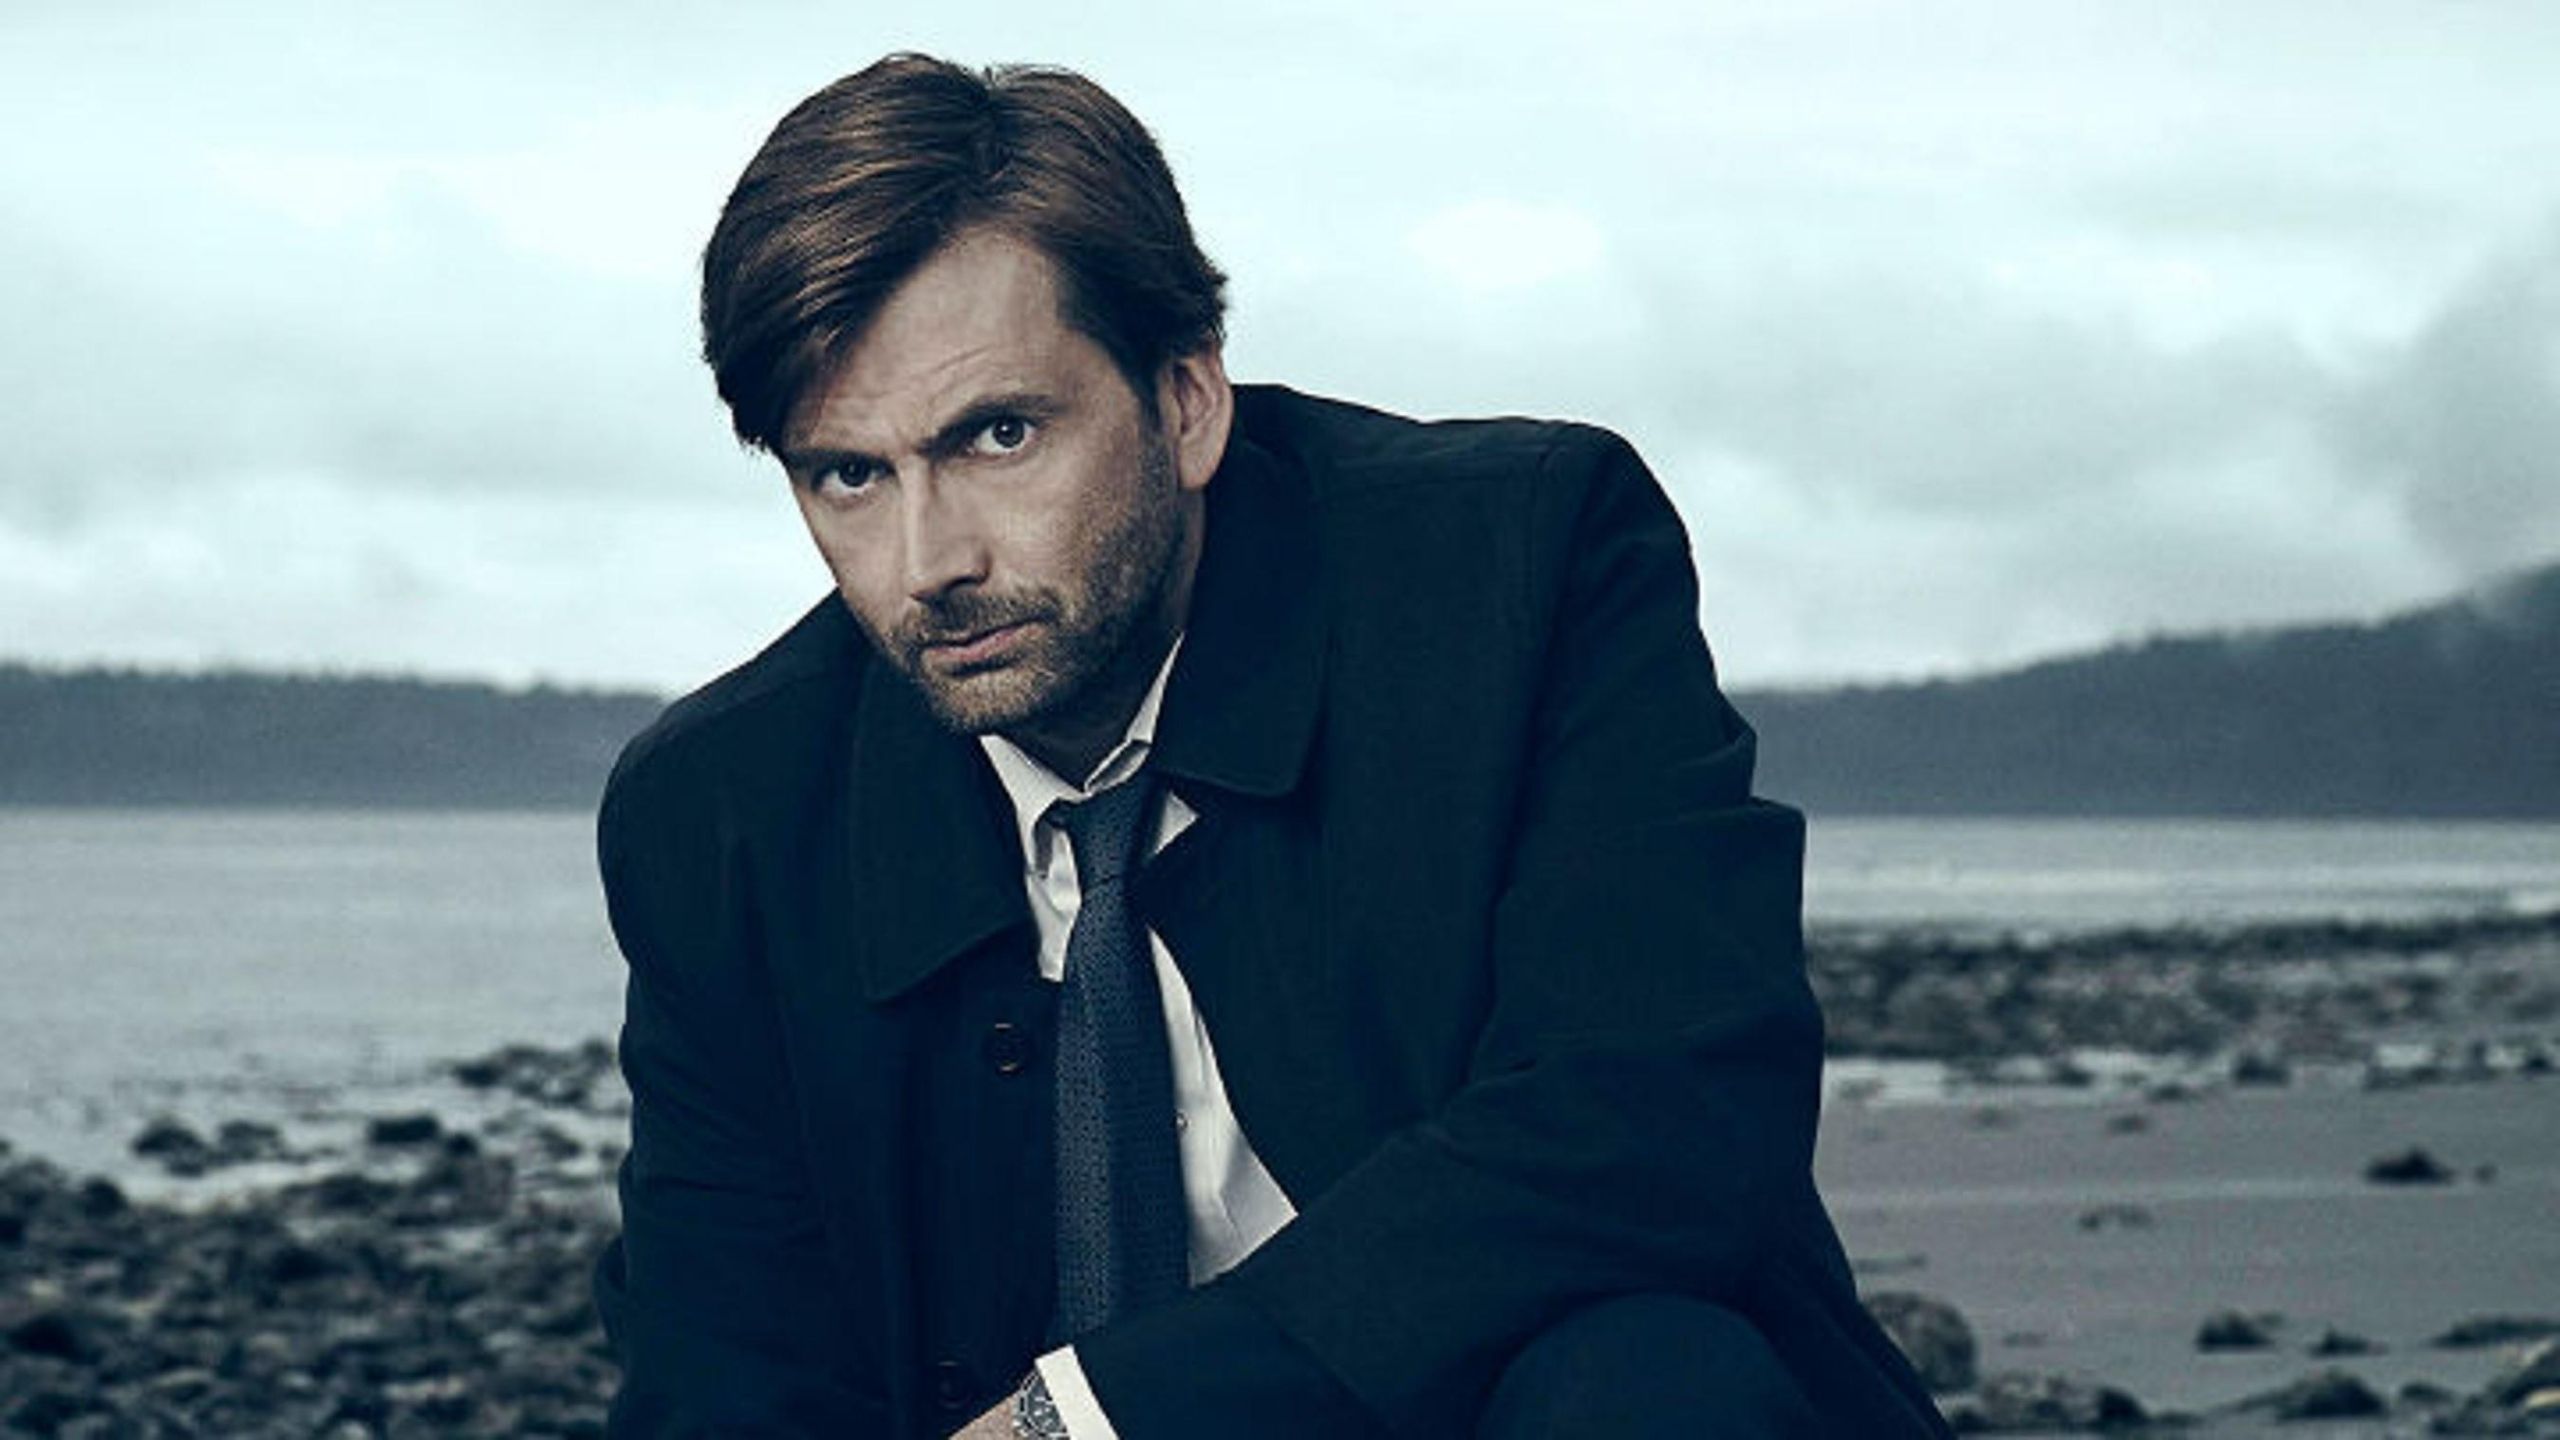 David Tenant as the main detective pictured crouching down on a beach